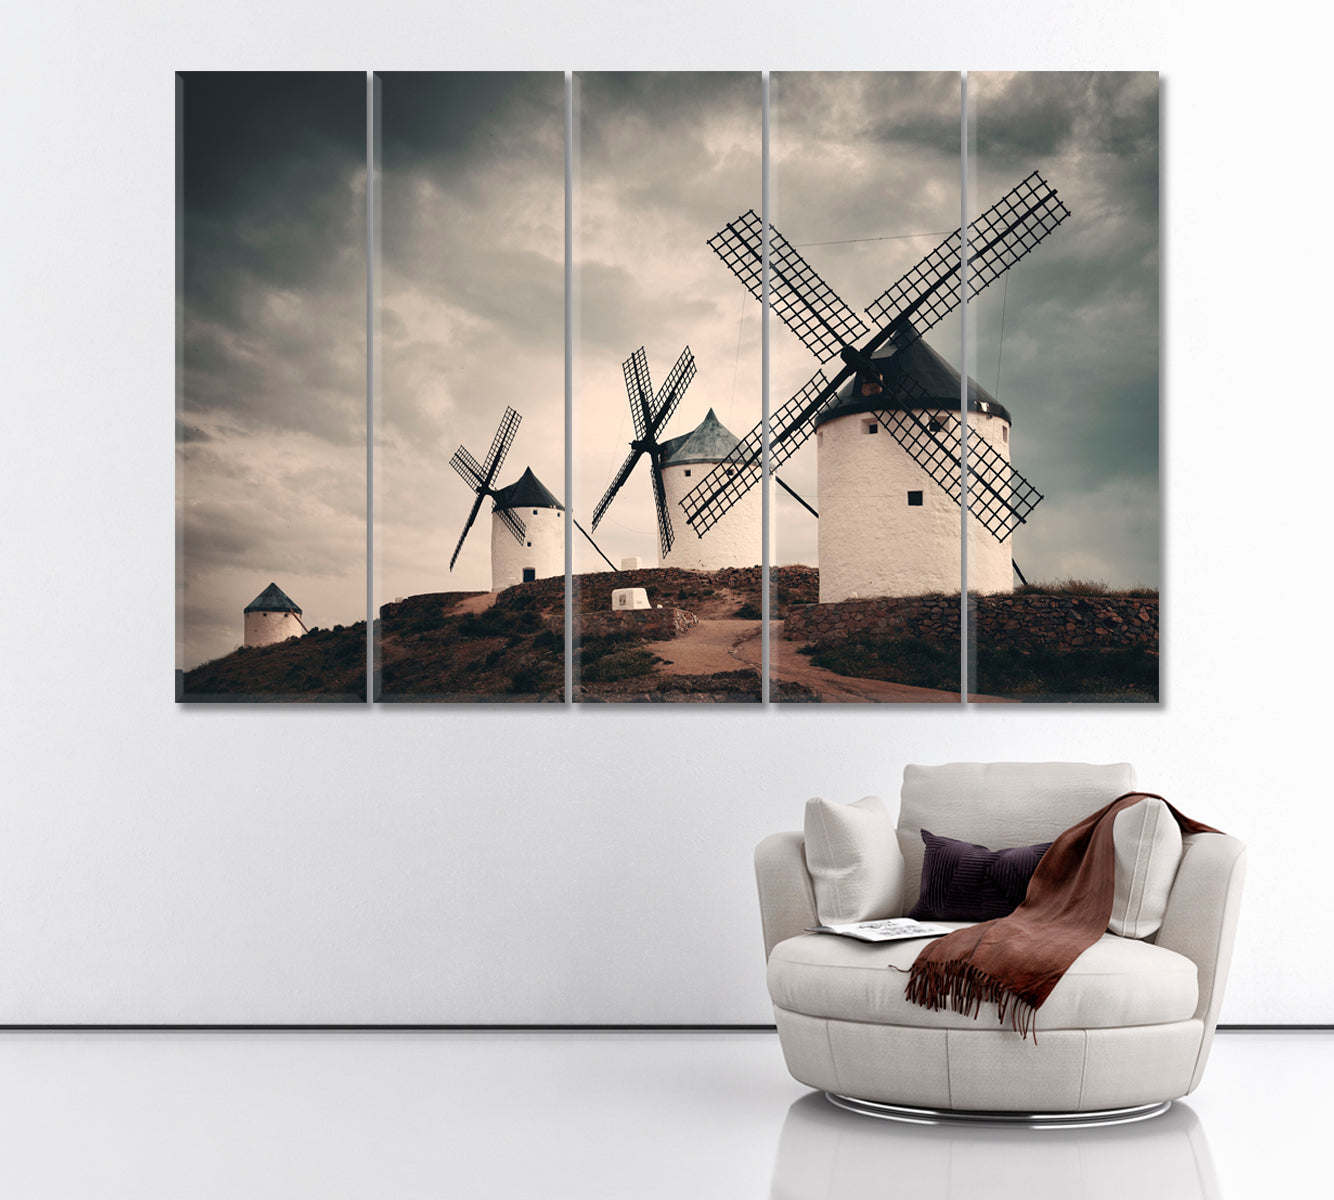 Windmills in Consuegra Spain Canvas Print ArtLexy 5 Panels 36"x24" inches 